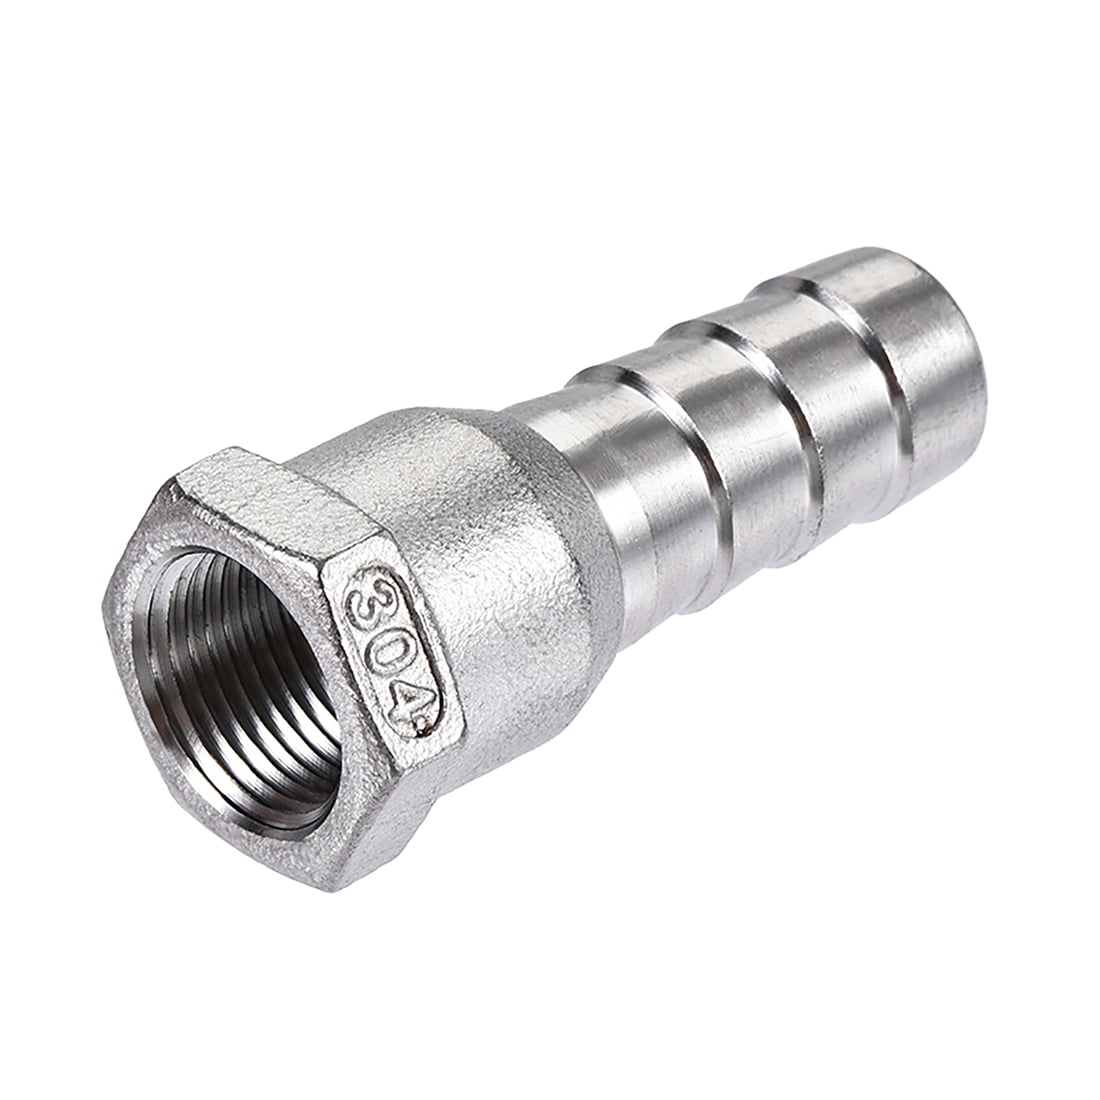 304 Stainless Steel Hose Barb Fitting Coupler 15mm Barb G3/4 Female Thread 2Pcs 